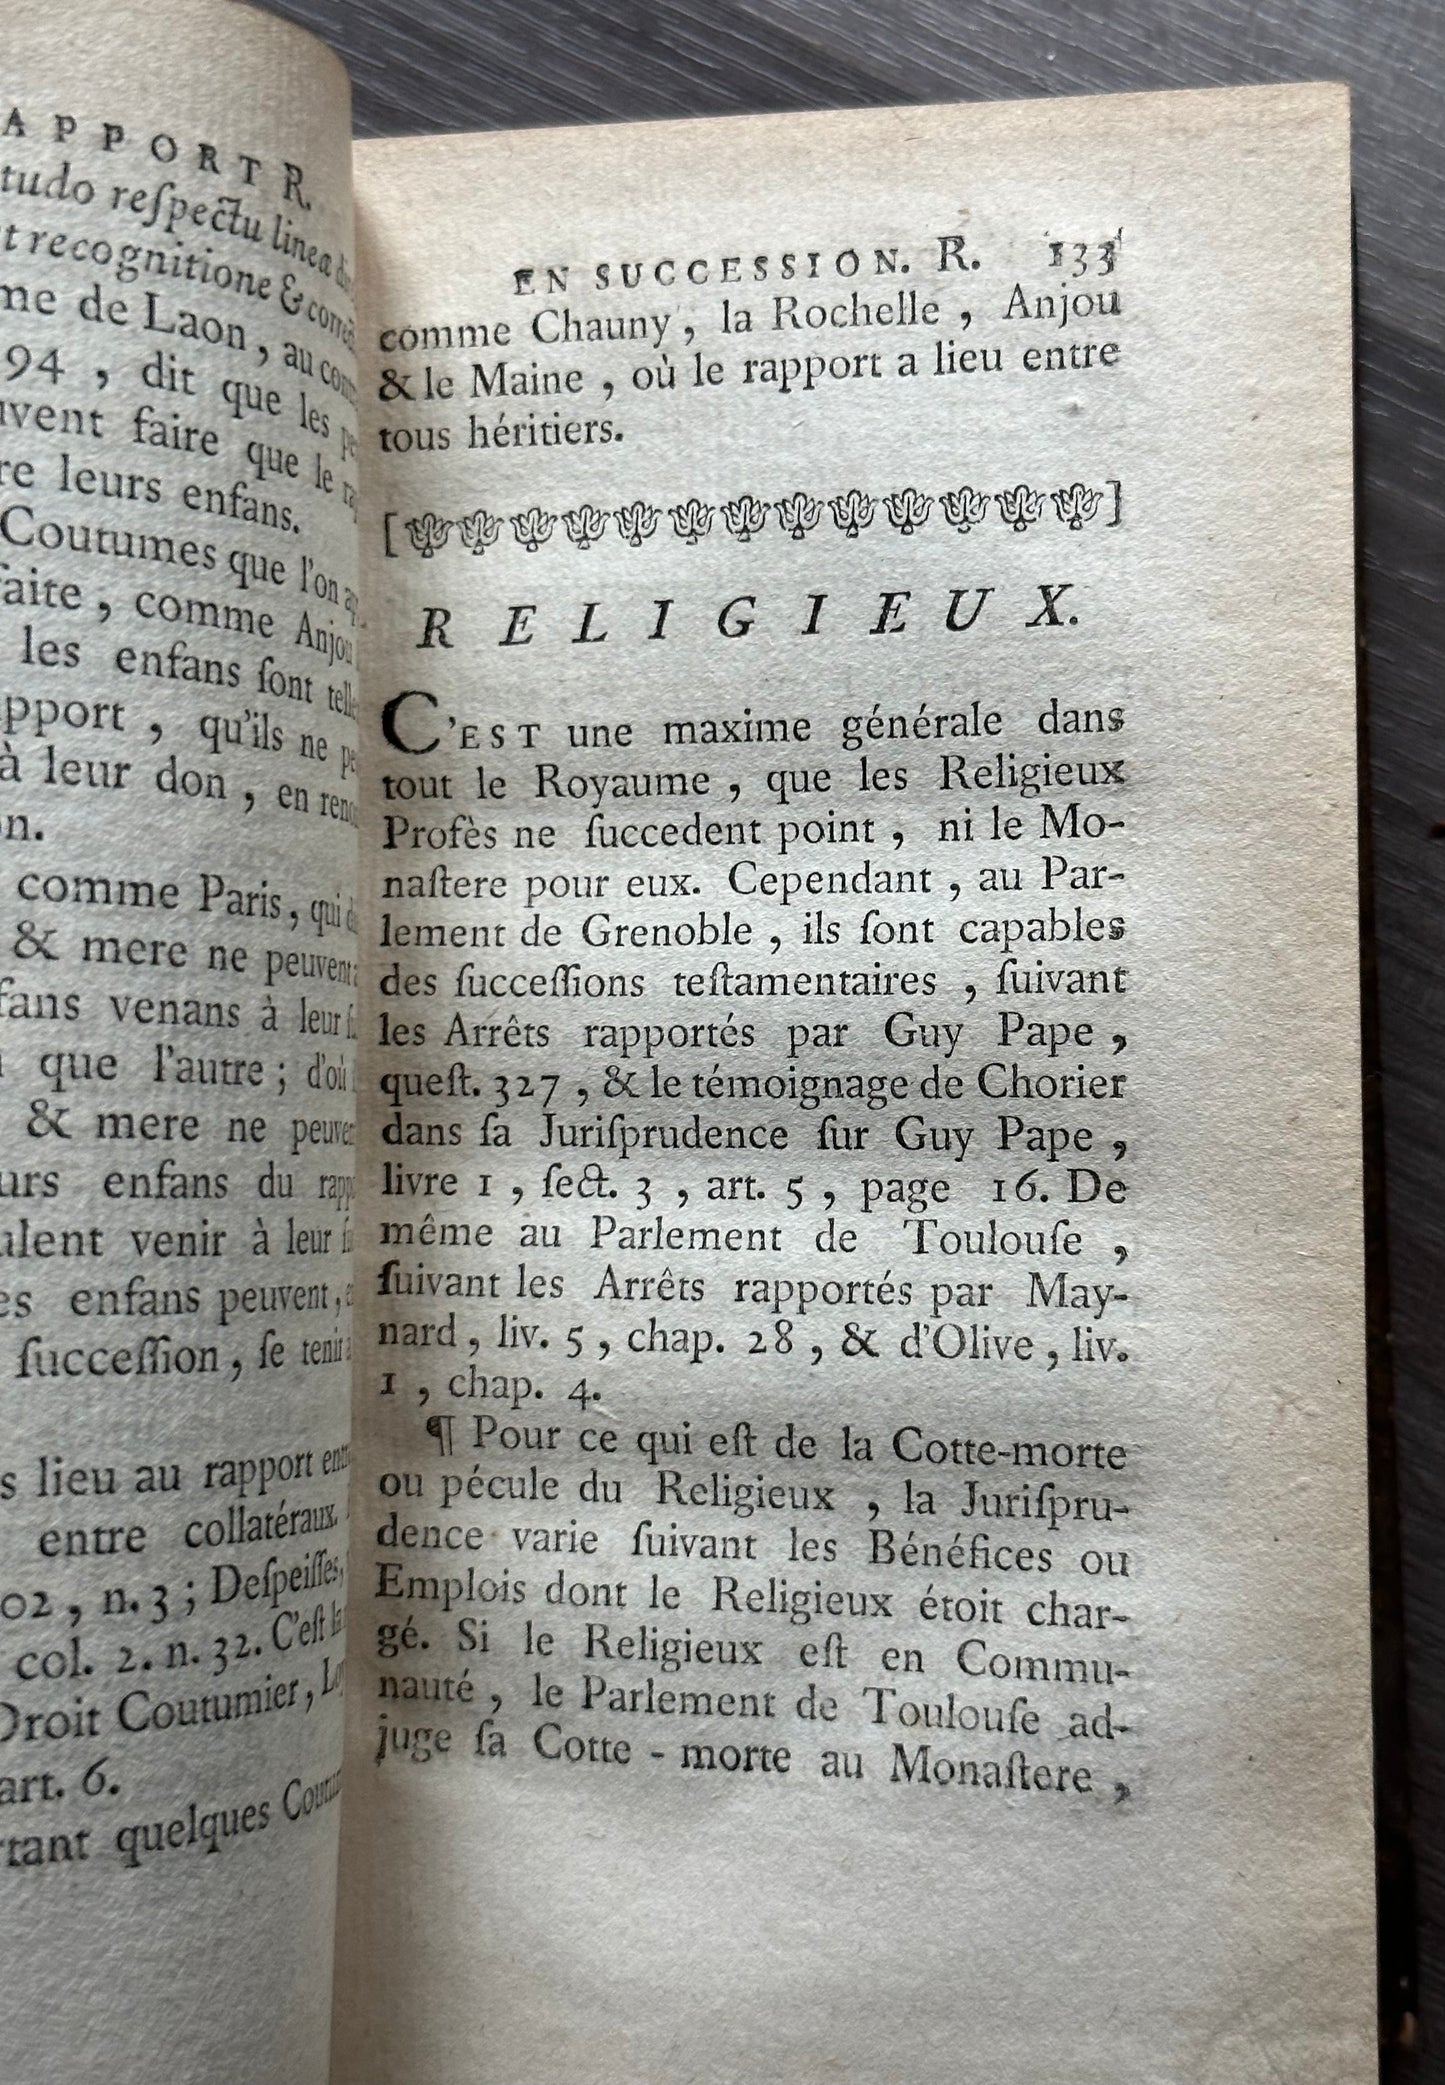 1771 Collection of Legal Questions